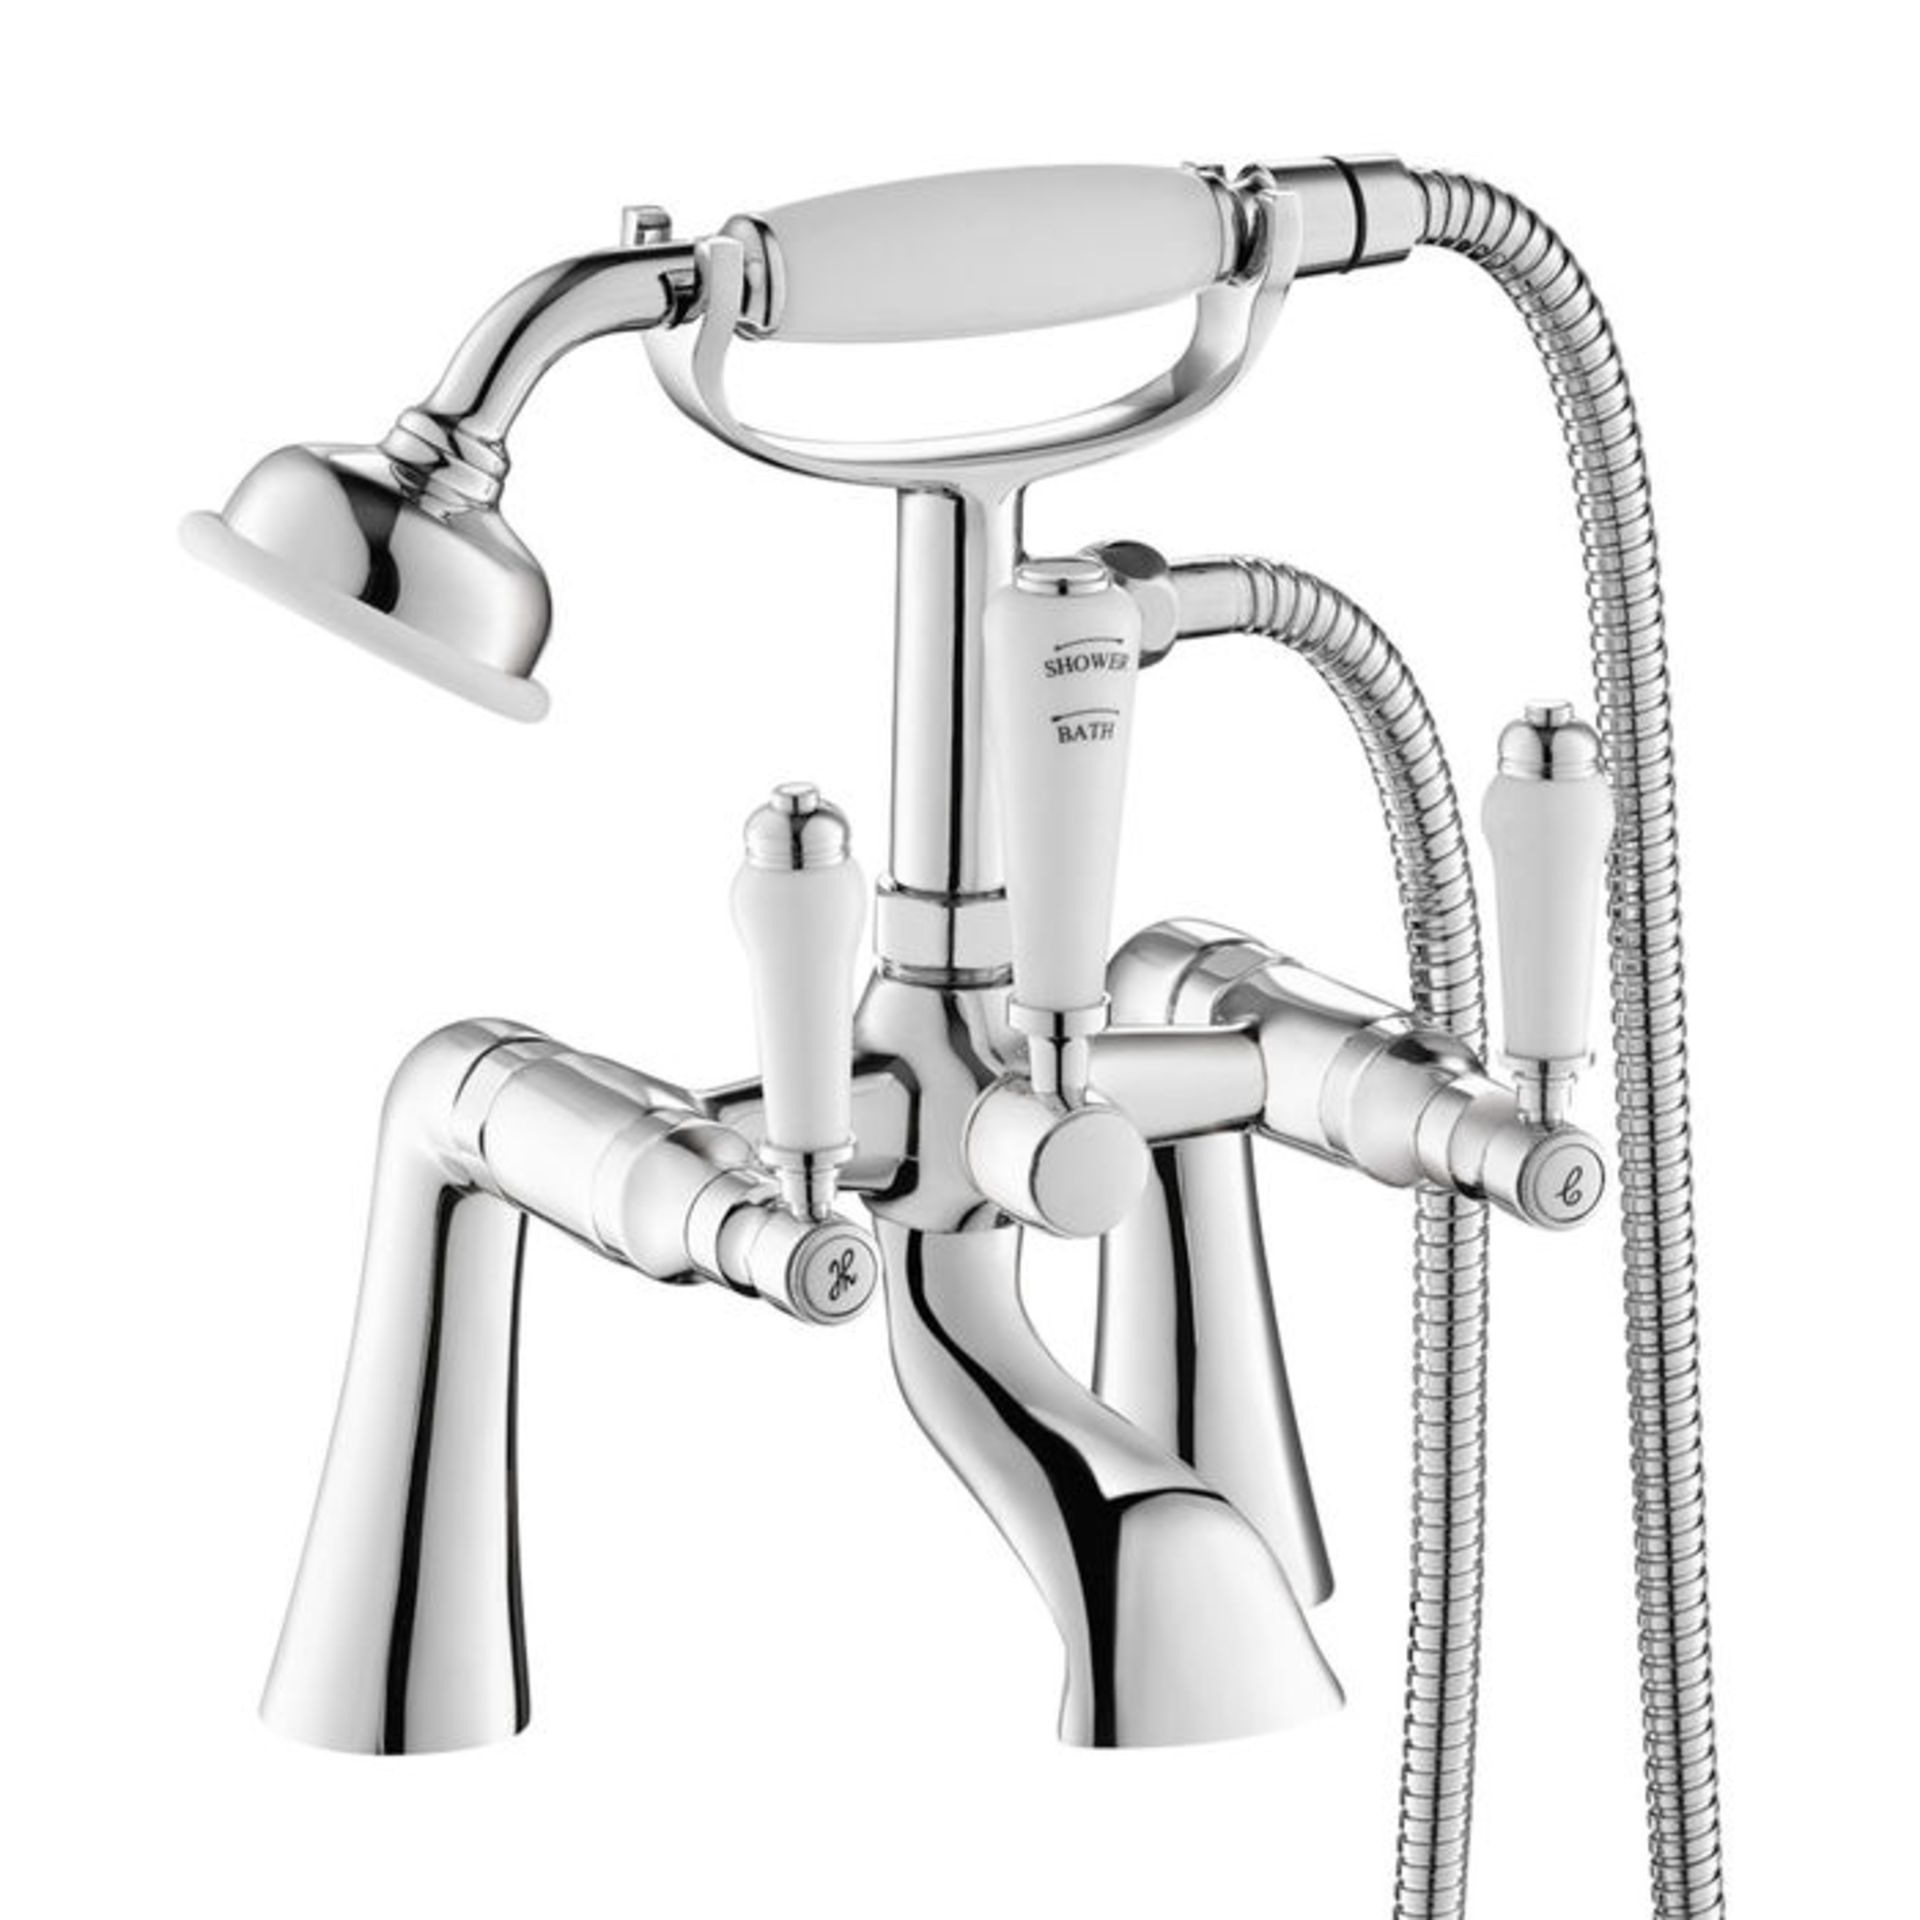 (PA39) Regal Chrome Traditional Bath Mixer Lever Tap with Hand Held Shower Chrome Plated Solid Brass - Image 2 of 5